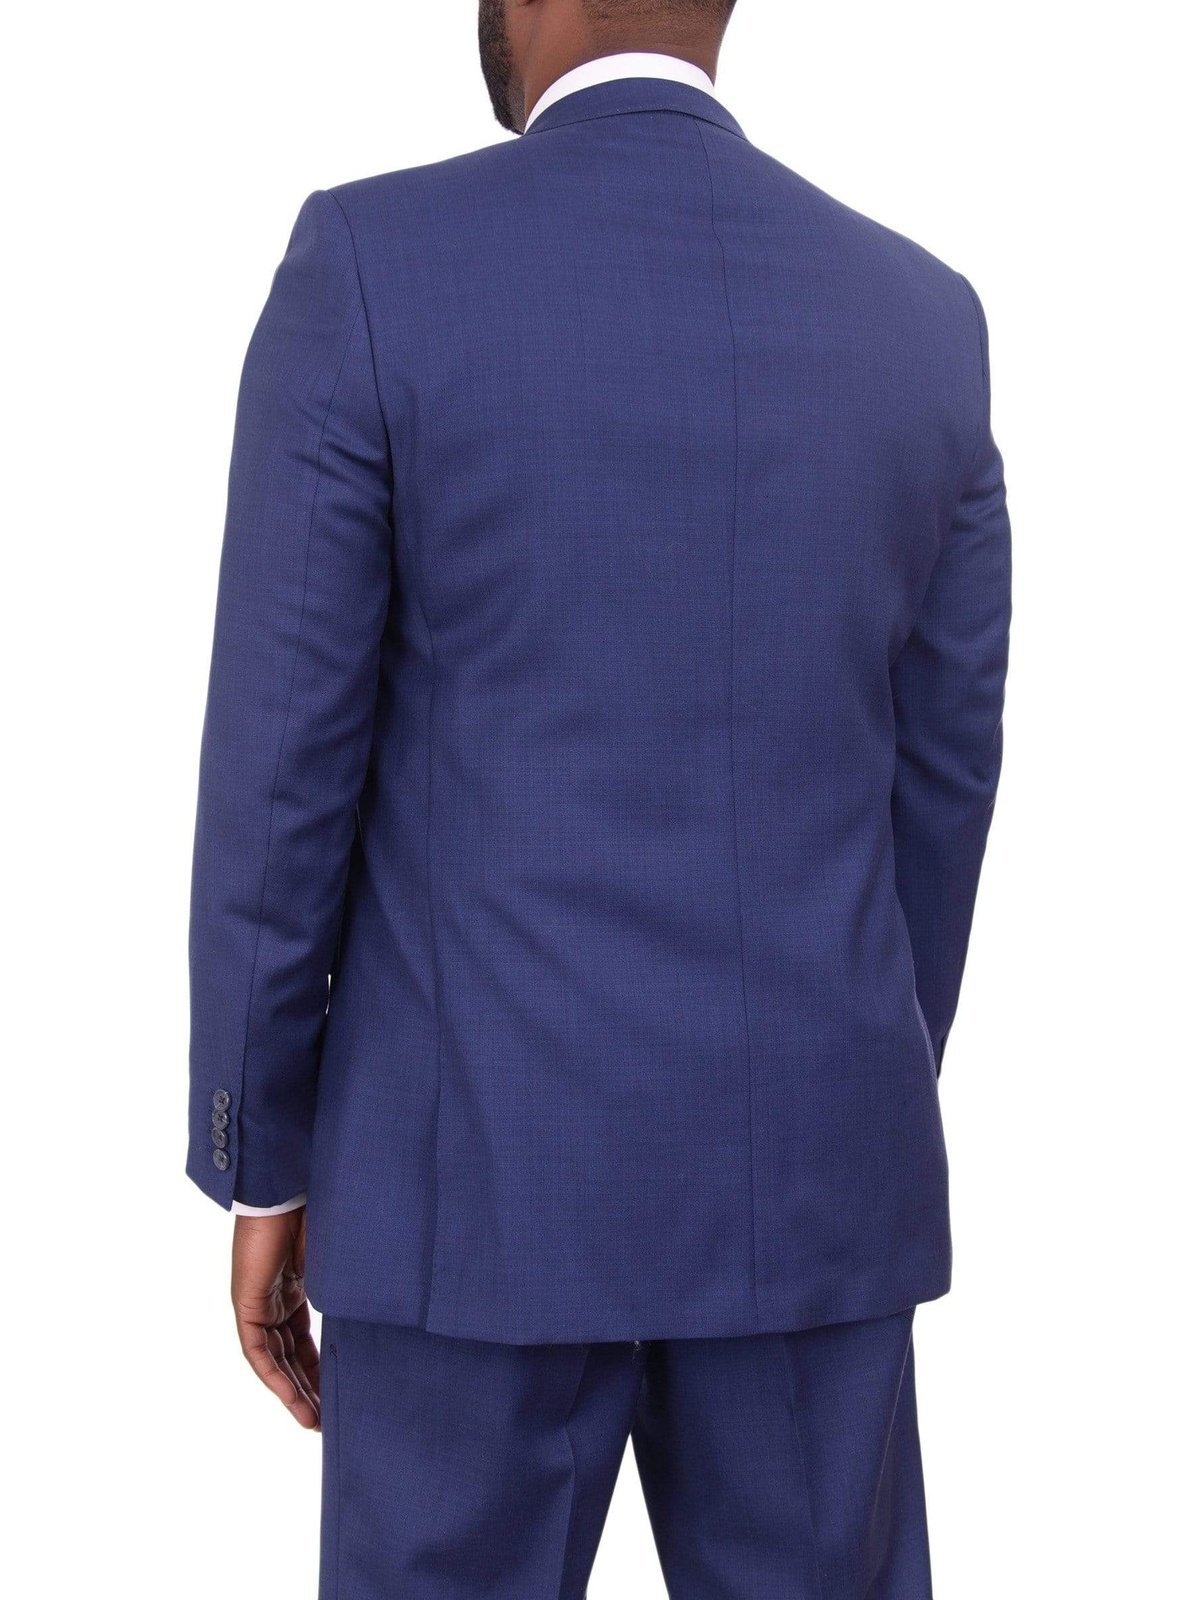 Giorgio Cosani TWO PIECE SUITS Giorgio Cosani Regular Fit Solid Royal Blue Two Button Wool Cashmere Blend Suit